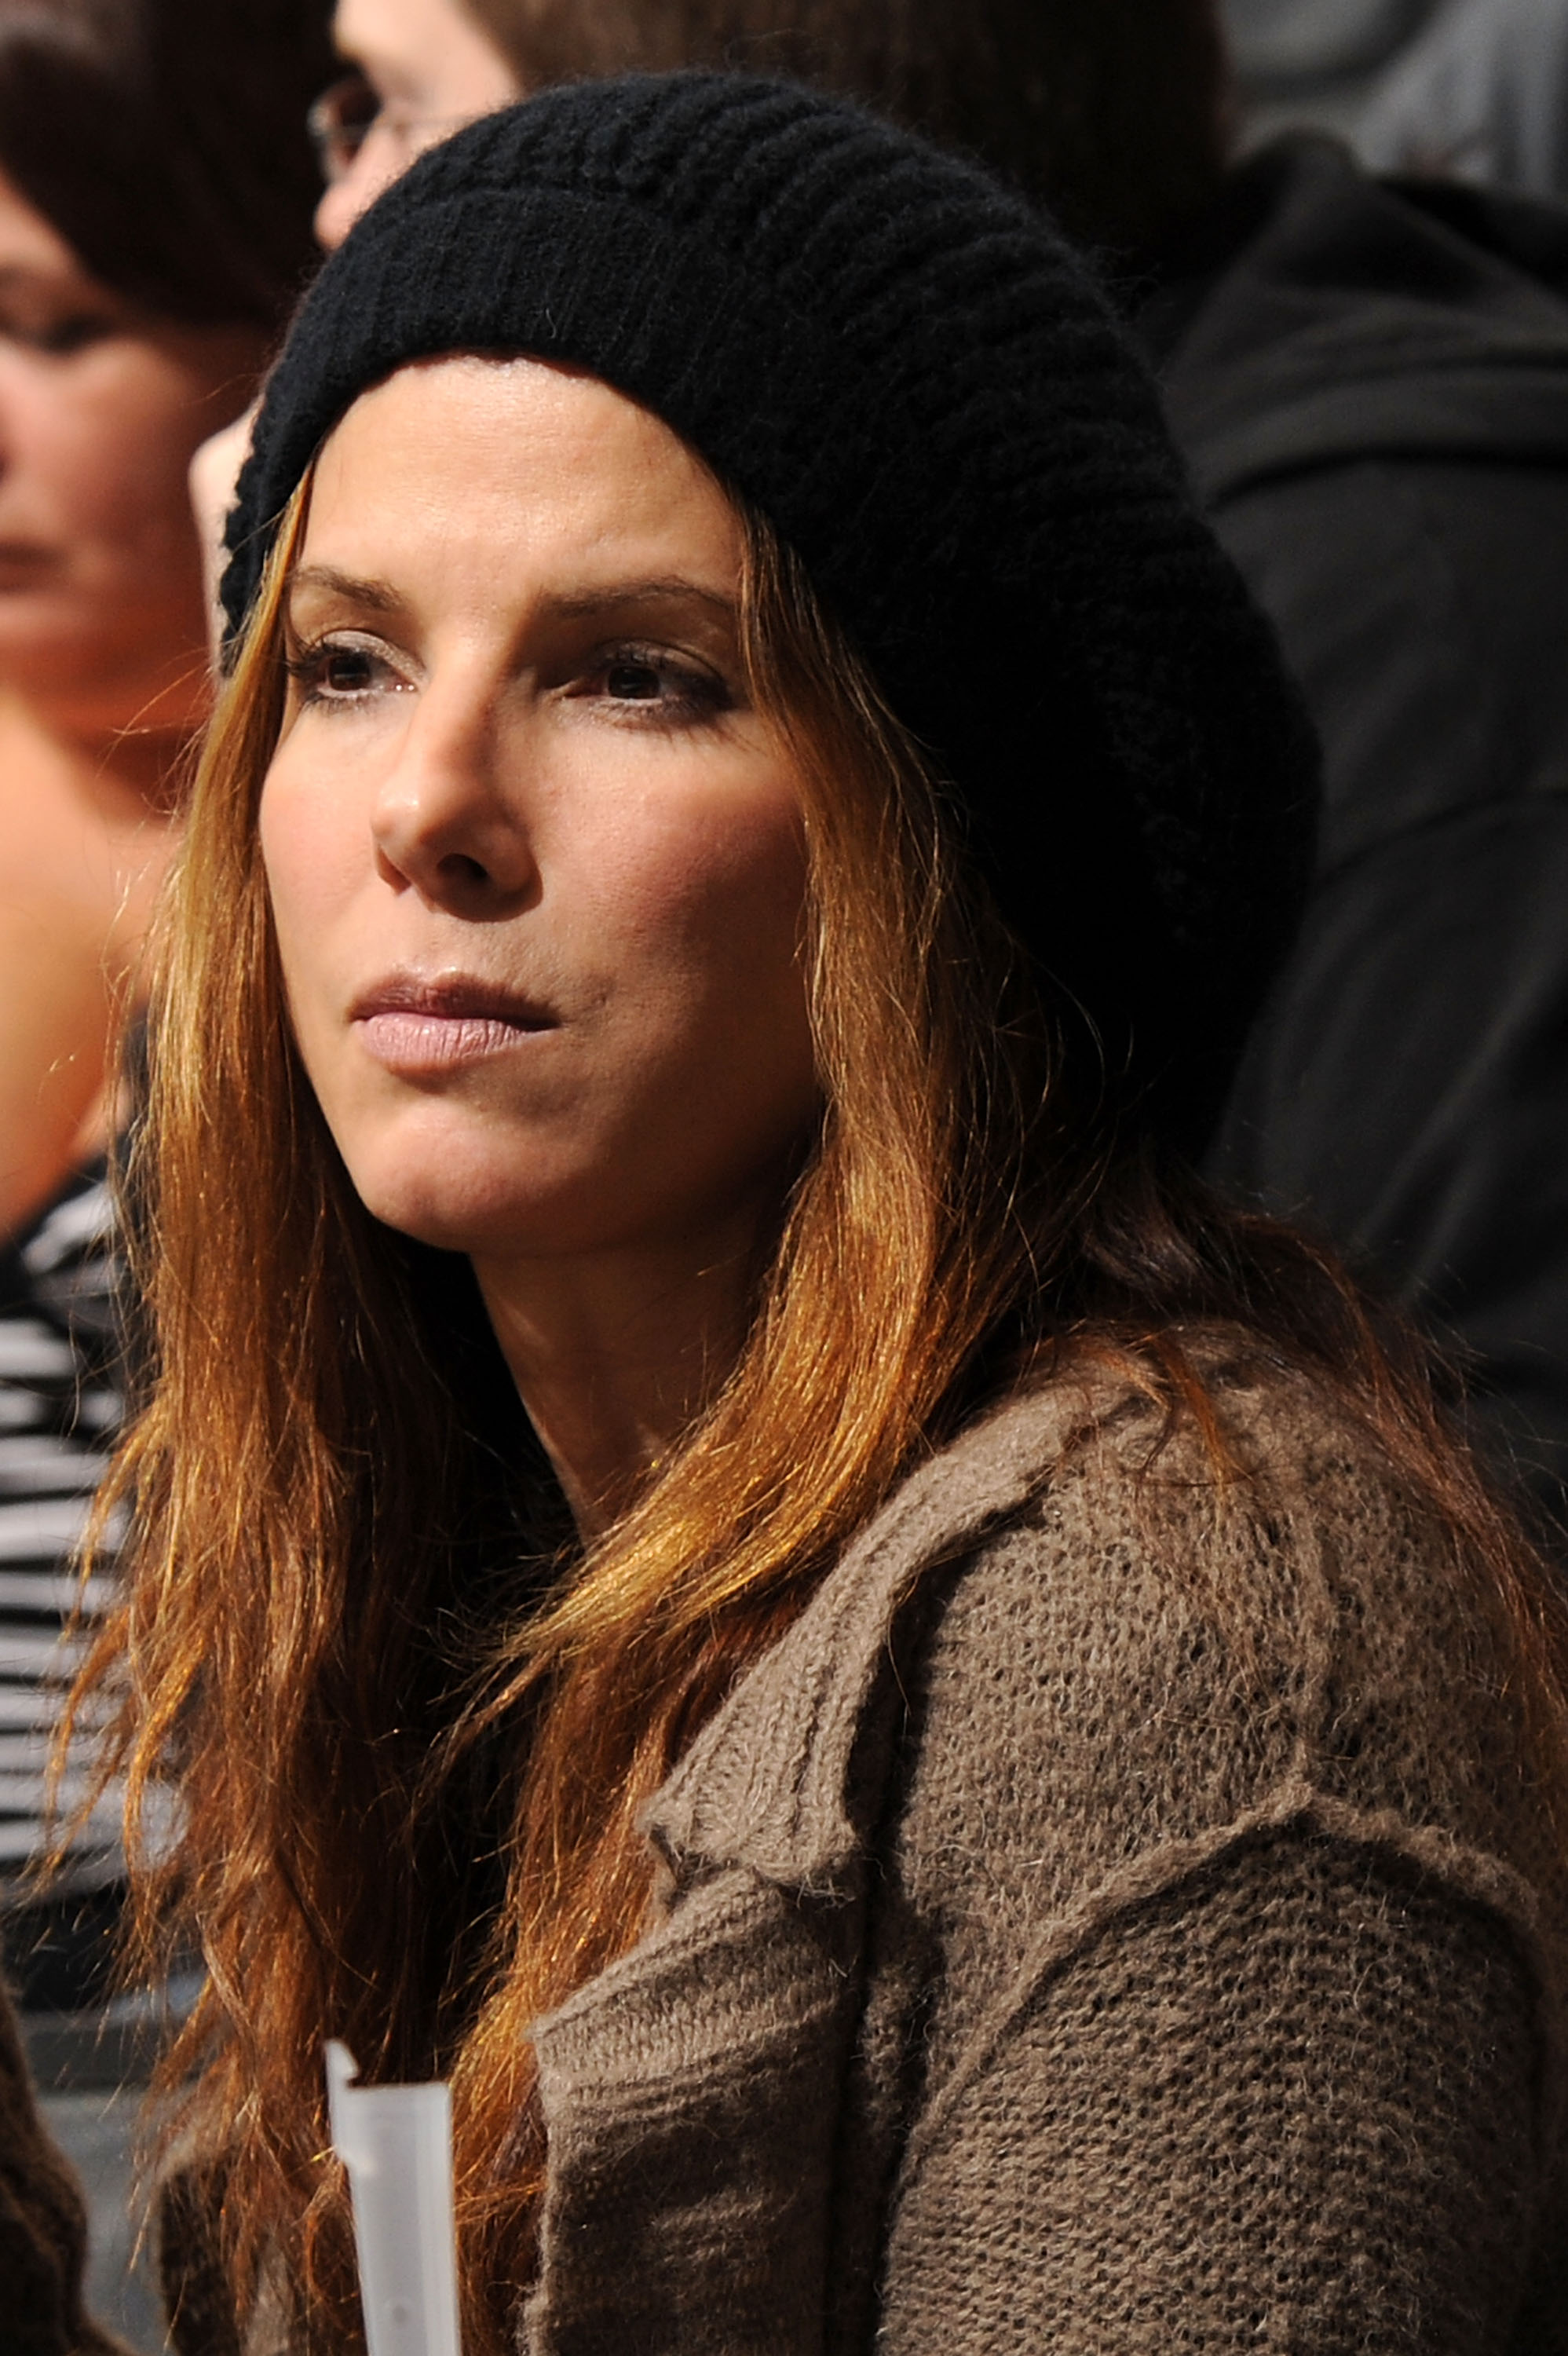 Sandra Bullock attends an NHL game on November 11, 2008 in Los Angeles, California | Source: Getty Images